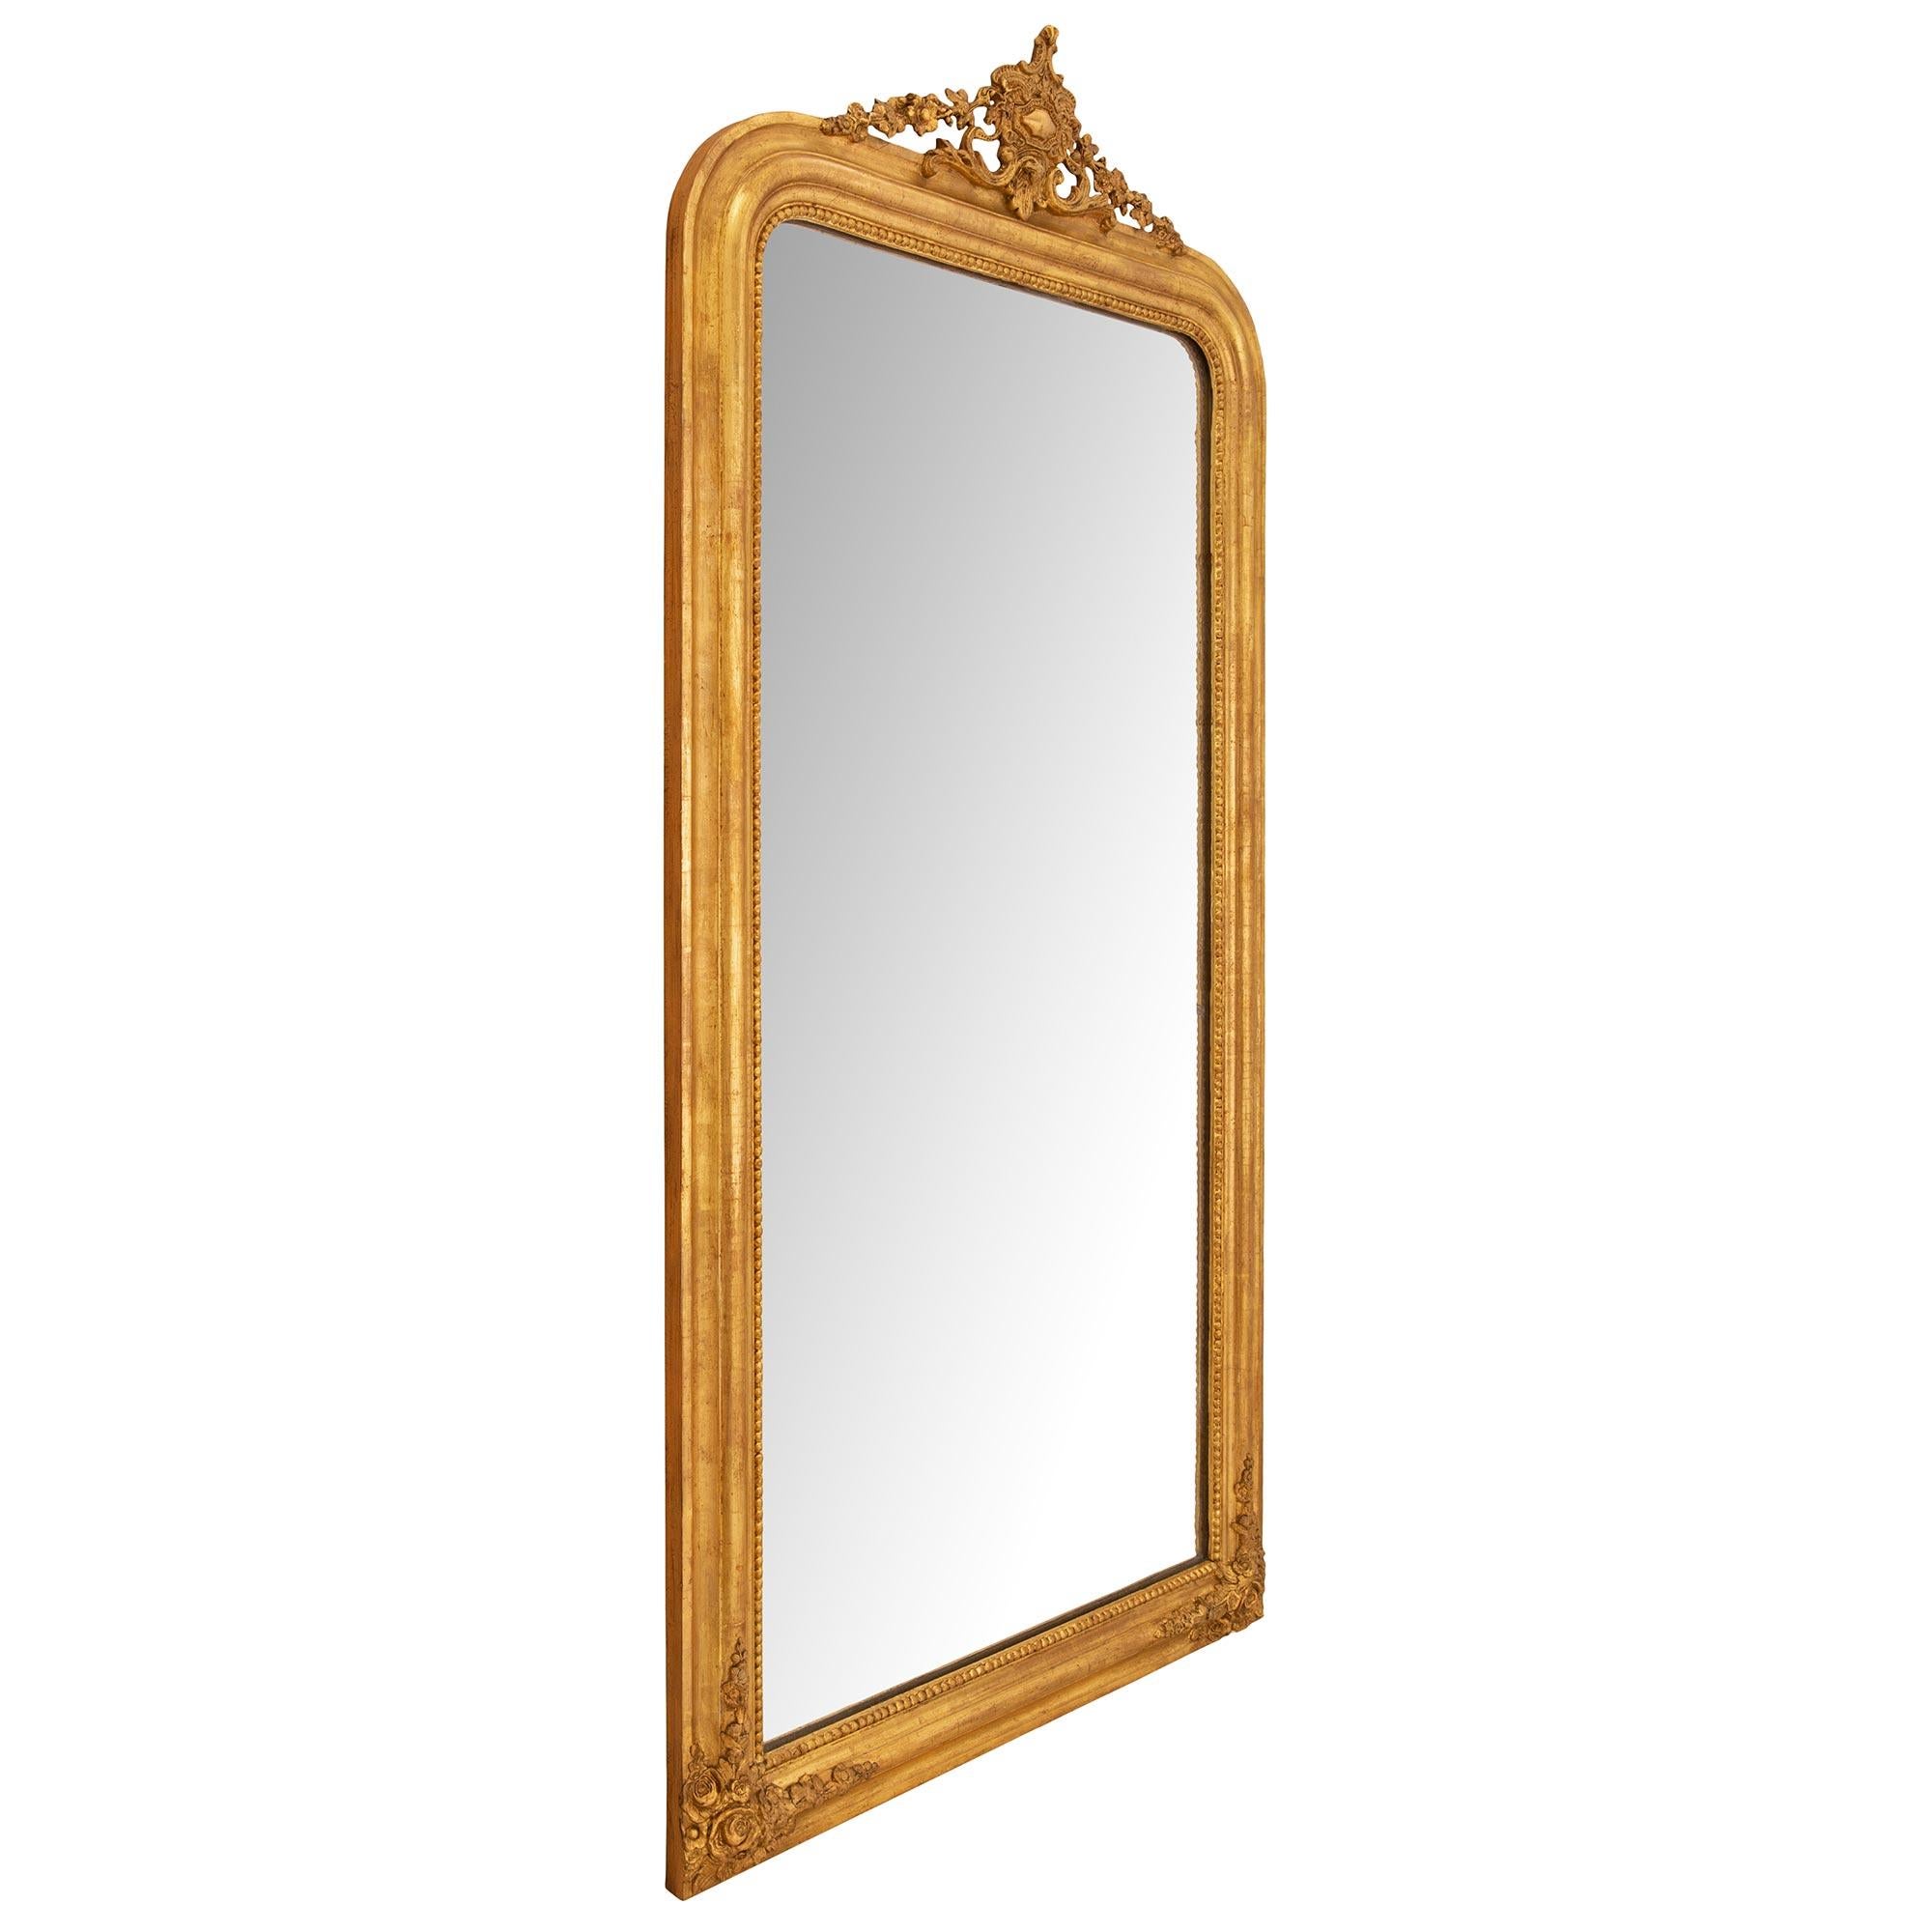 An elegant French 19th century Louis Philippe period giltwood mirror. The mirror retains its original mirror plate set within a fine wrap around beaded band. The mottled frame displays charming richly carved blooming flowers at each bottom corner